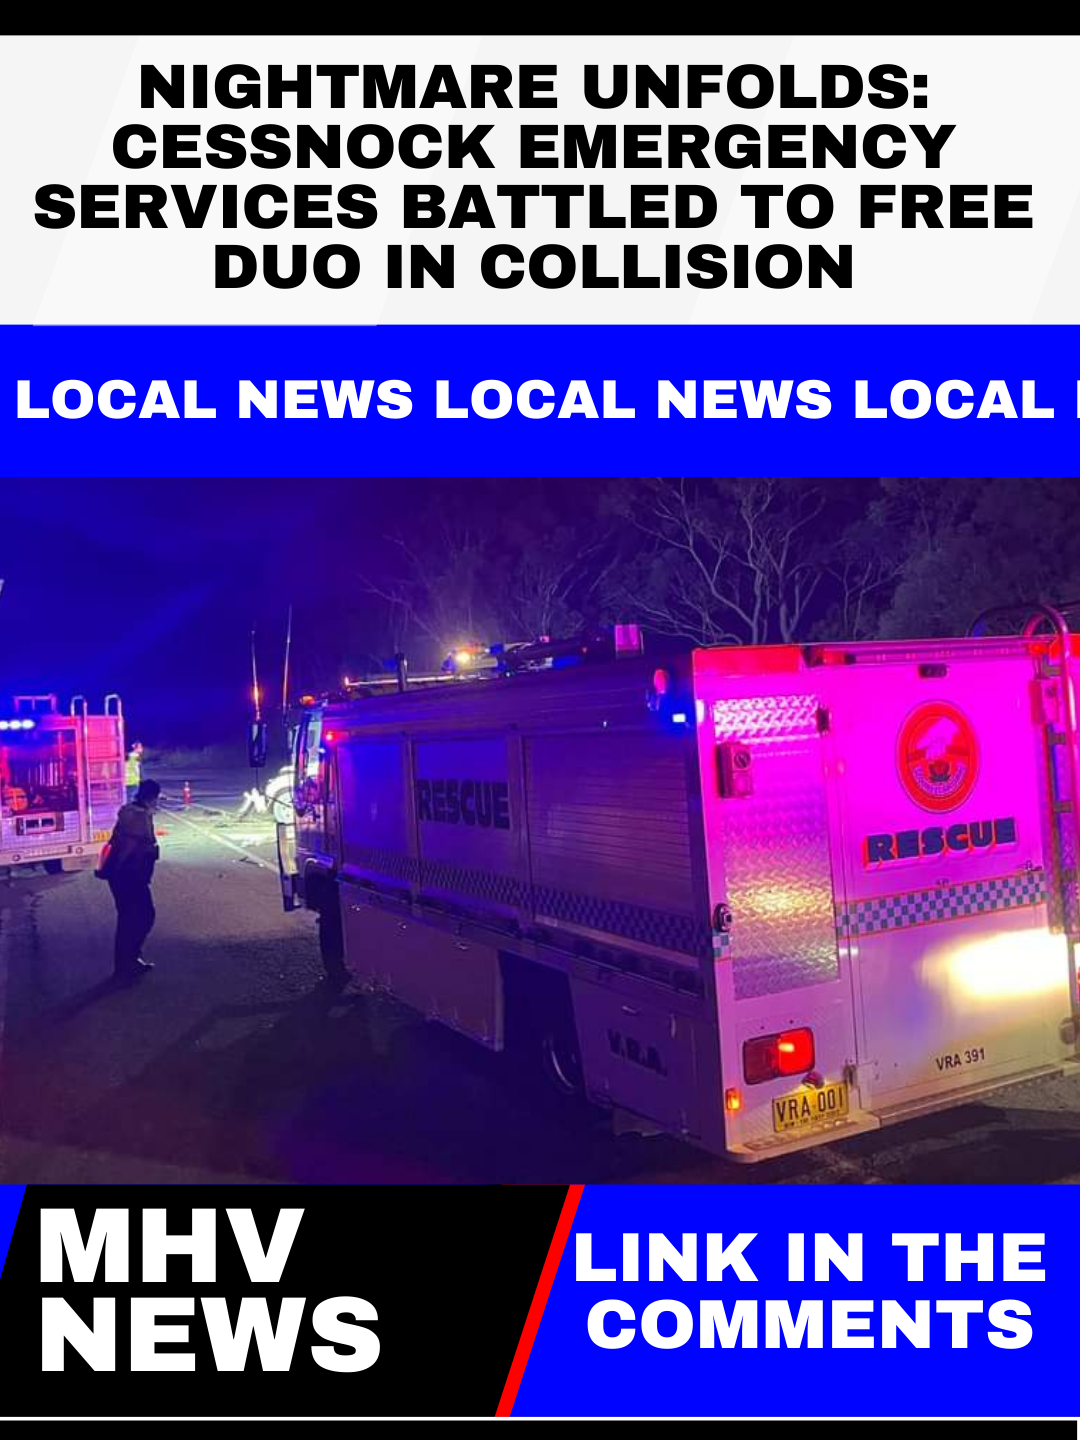 You are currently viewing Nightmare Unfolds: Cessnock Emergency Services Battled to Free Duo in Collision.